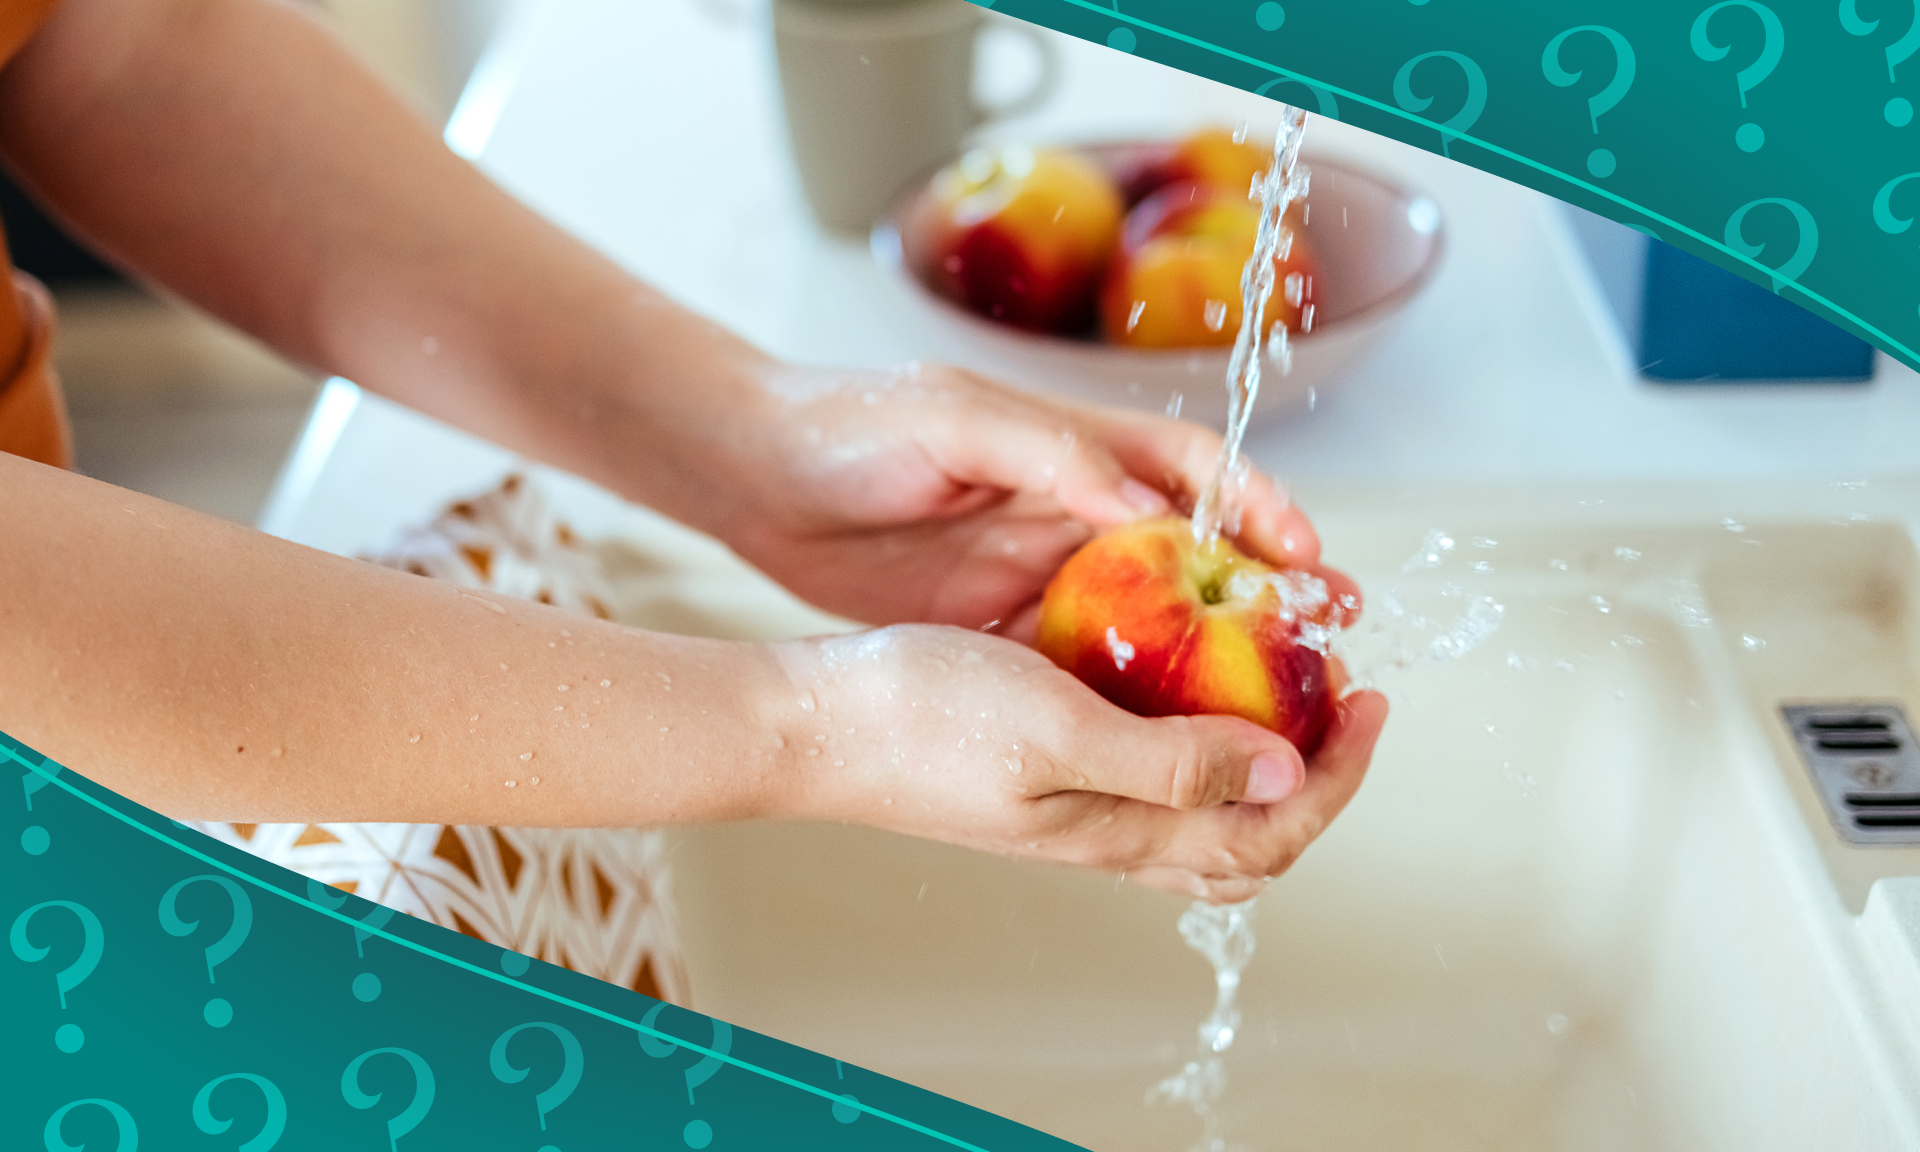 How to Wash Fruits and Vegetables to Lower the Risk of Illness